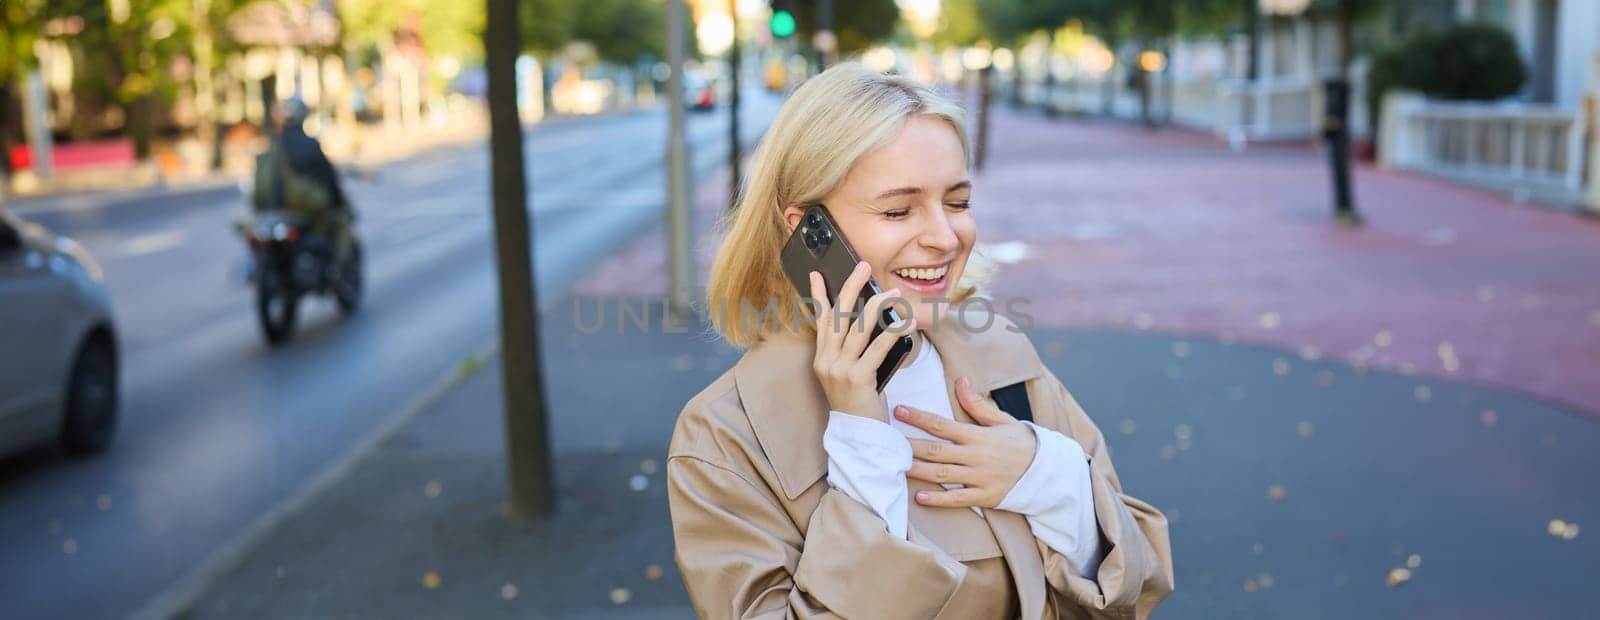 Close up portrait of beautiful young woman, blonge girl walking on street with mobile phone, chatting with friend, has happy face expression while talking over cellphone on her way.